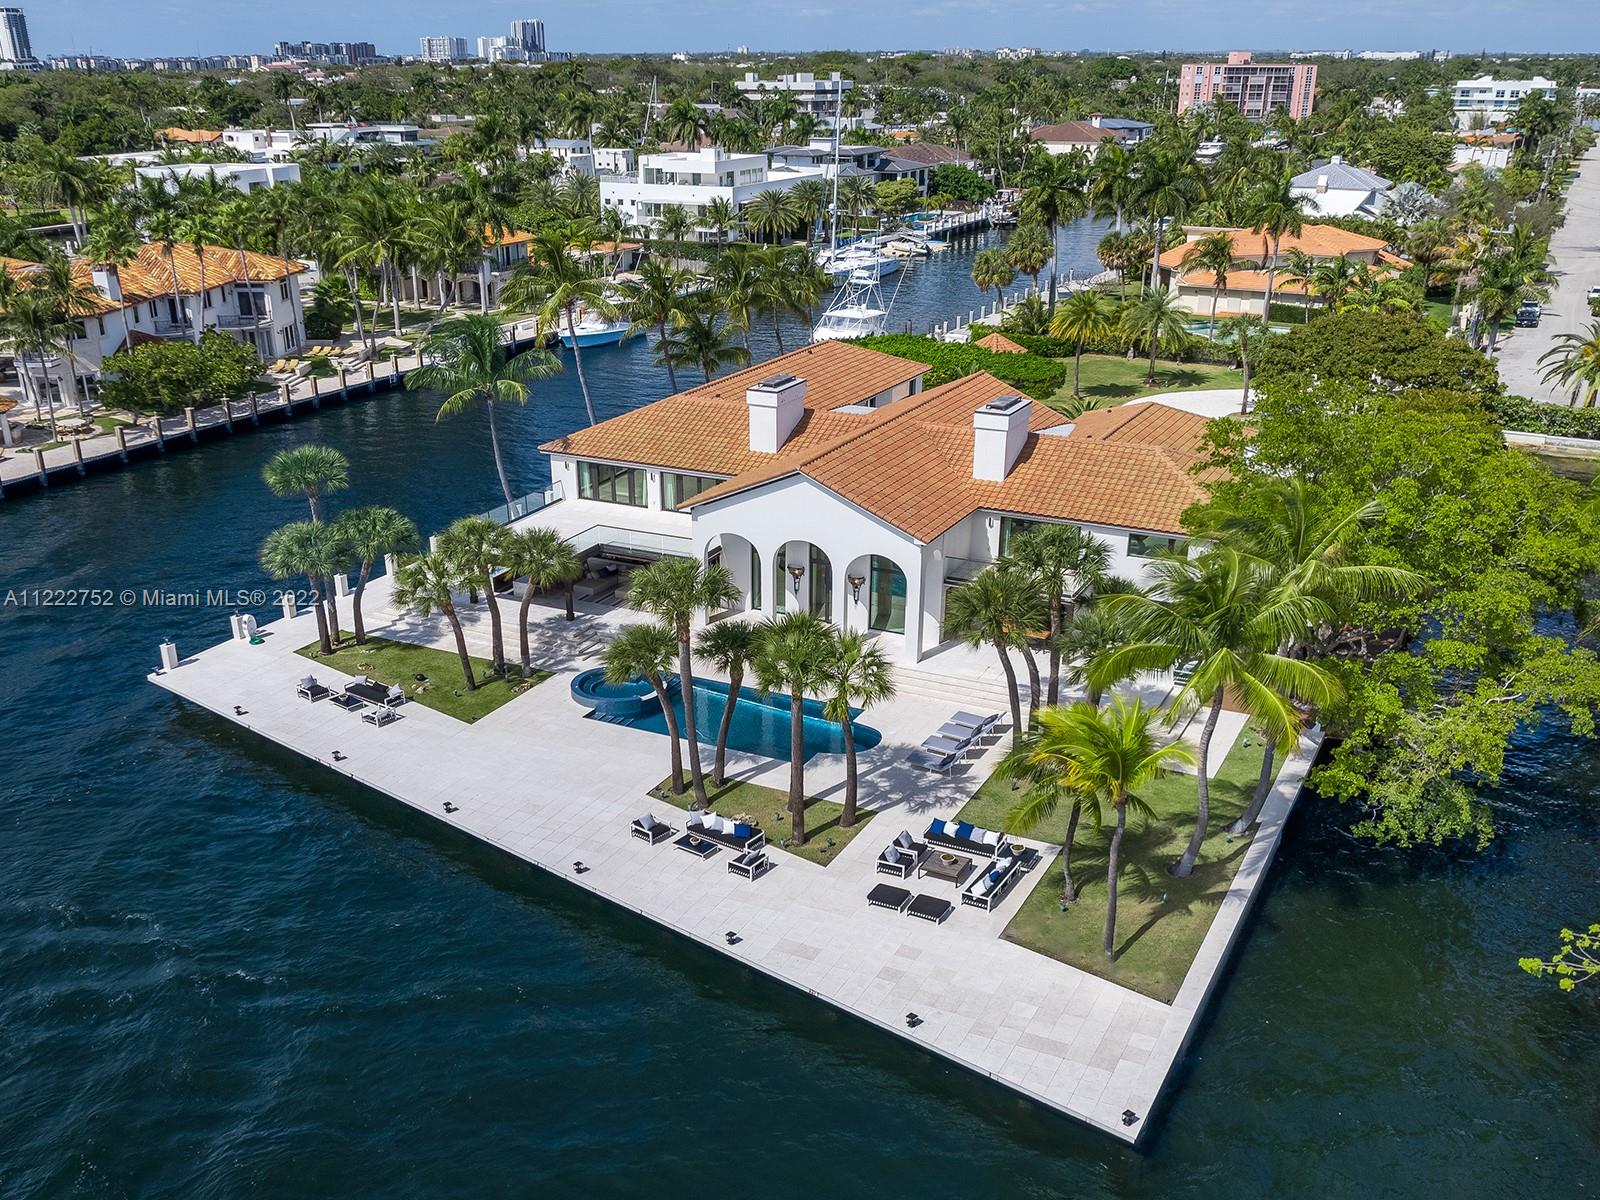 This Las Olas Isles estate has the rare distinction of occupying its own private peninsula, with spectacular views
and approx. 700+ ft. of dockage on three sides, including a protected 285-ft. boat slip able to accommodate a
mega-yacht. The almost 11,000 Sqft. residence offers superlative amenities such as a formal living room with high ceilings, copious balconies and protected loggias for gracious outdoor entertaining, an elegant waterfront pool with spa, a lavish master suite with a private terrace from where one can enjoy endless waterway views, a Crestron smart home system, and a stately motor court which provides access to the car garage. The fireplace and book-matched marble floors in the living room complement the elegant bar, perfect for a grand reception or an intimate nightcap.